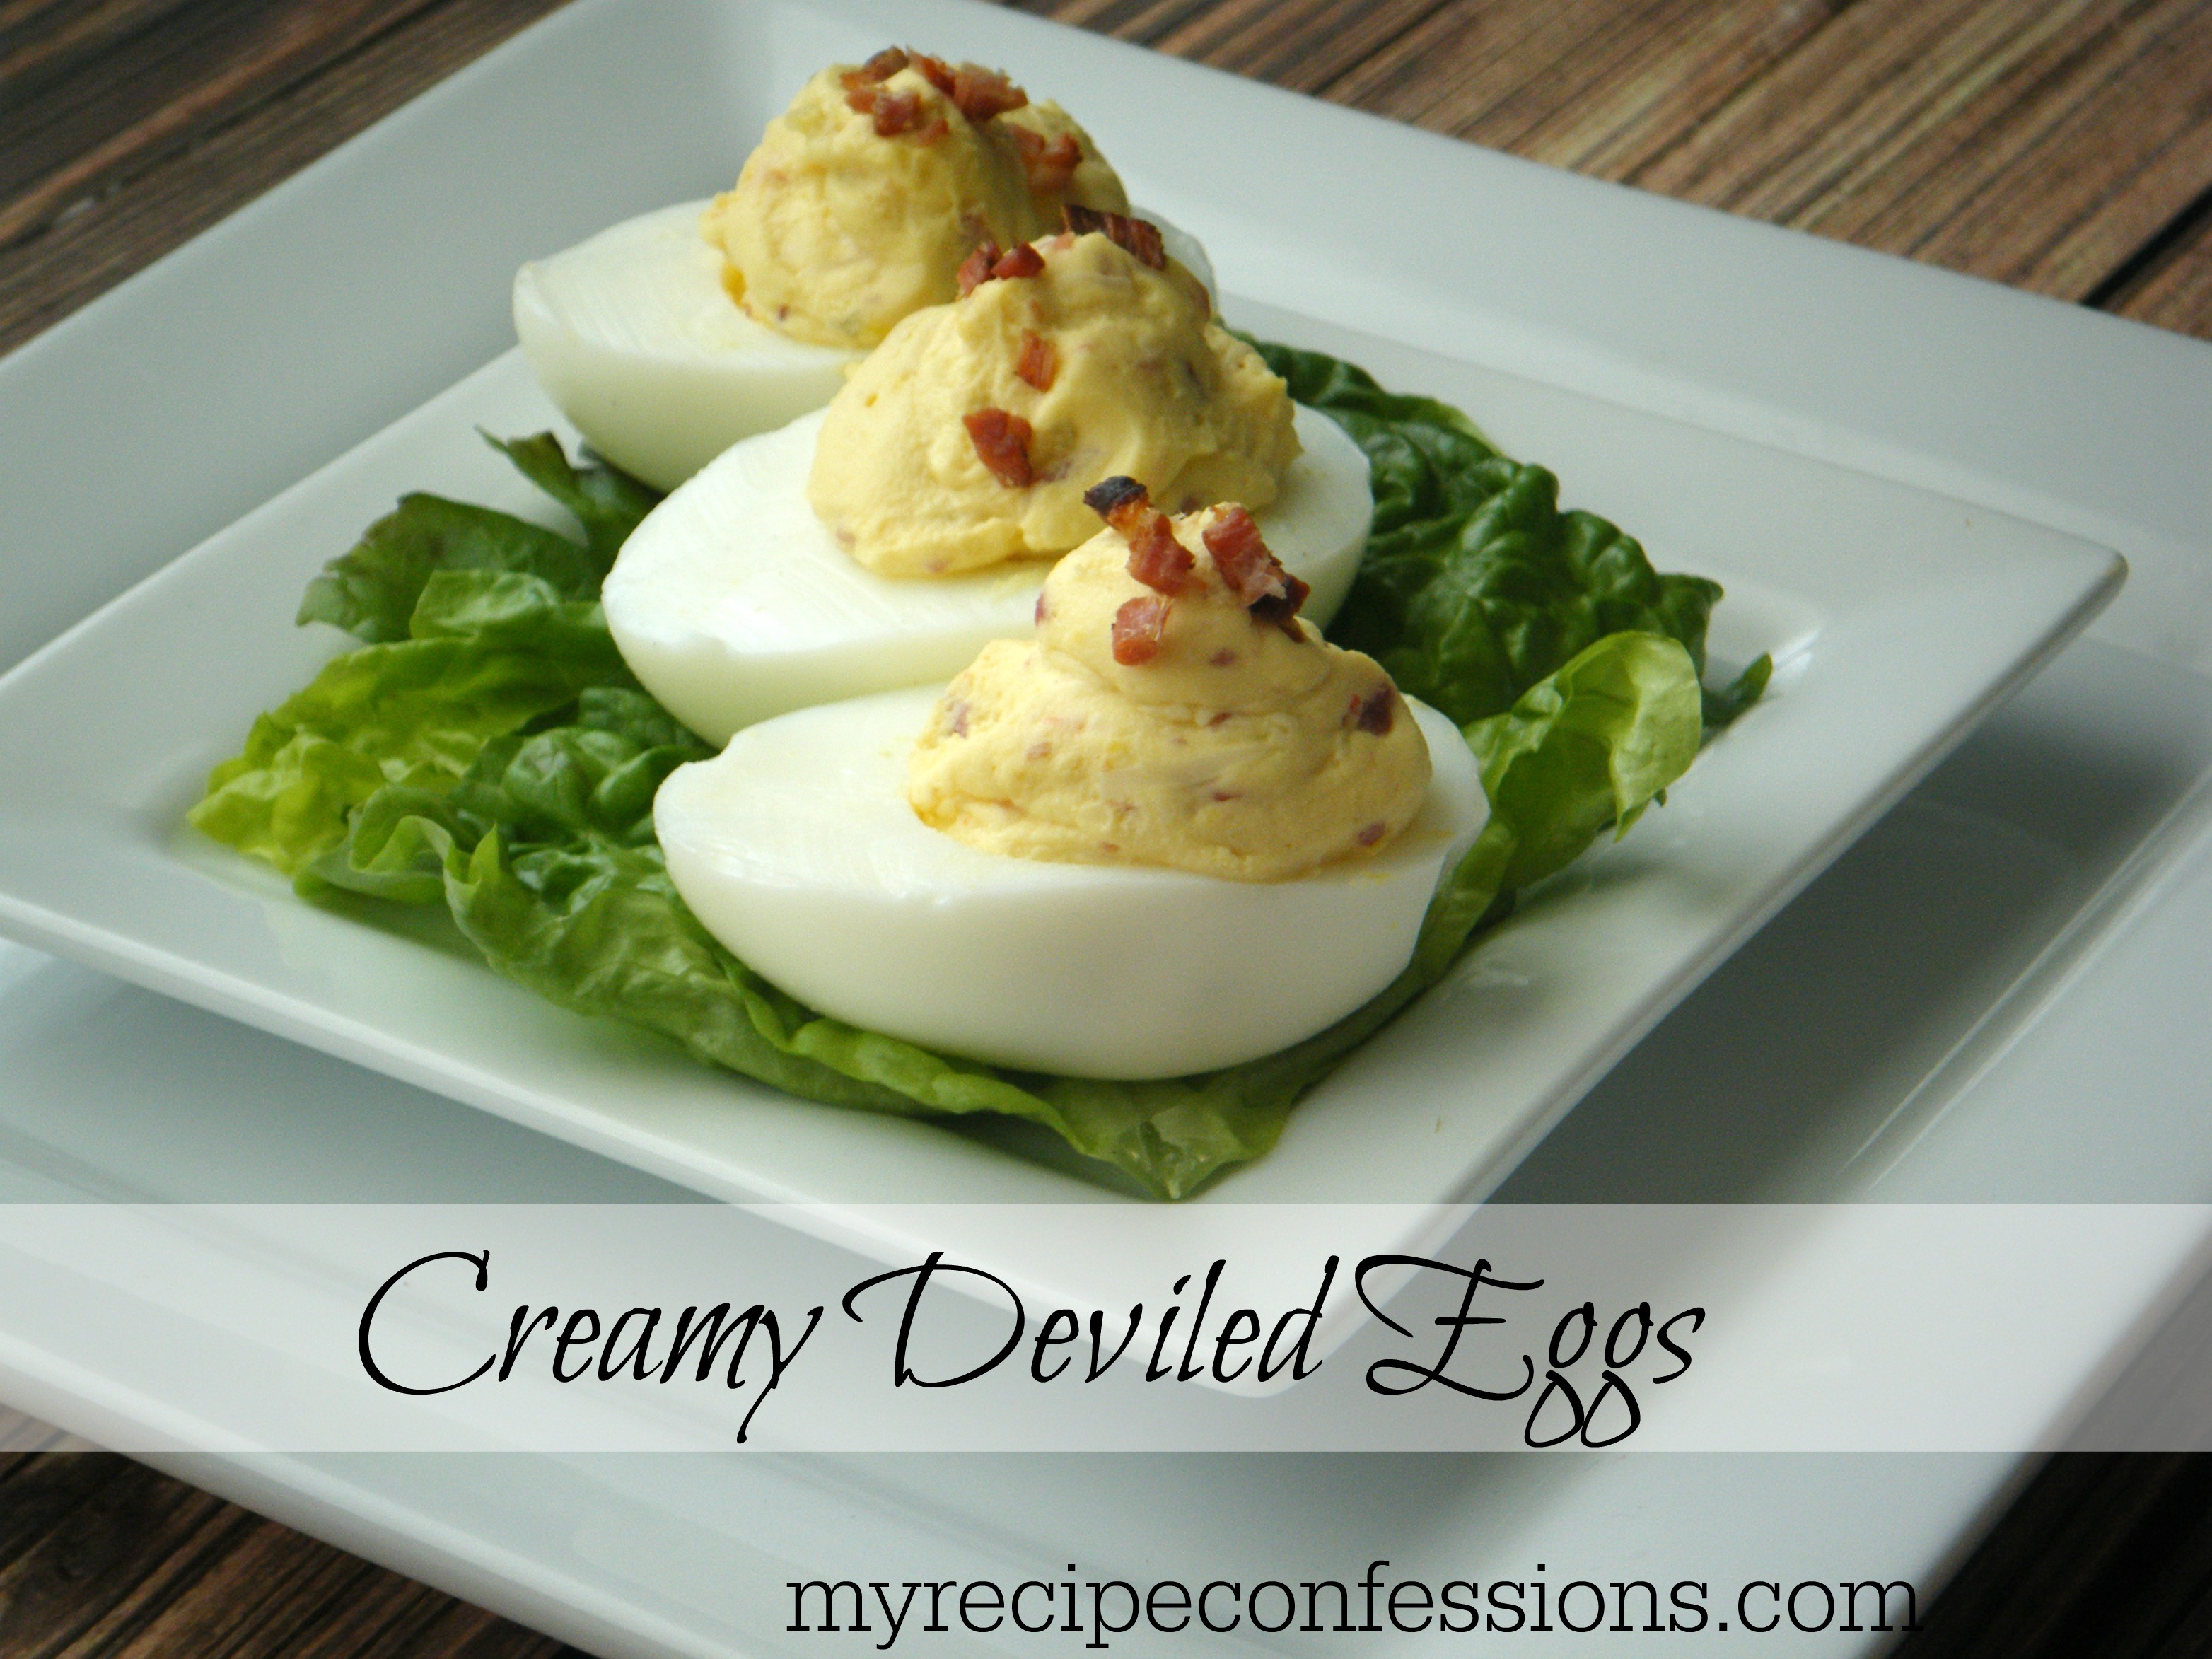 Creamy Deviled Eggs. I have tried many deviled egg recipes, but I wanted a recipe that was a little different that rest. These deviled eggs are very addiciting! They make the perfect appetizers and are a great gluten- free recipe! 